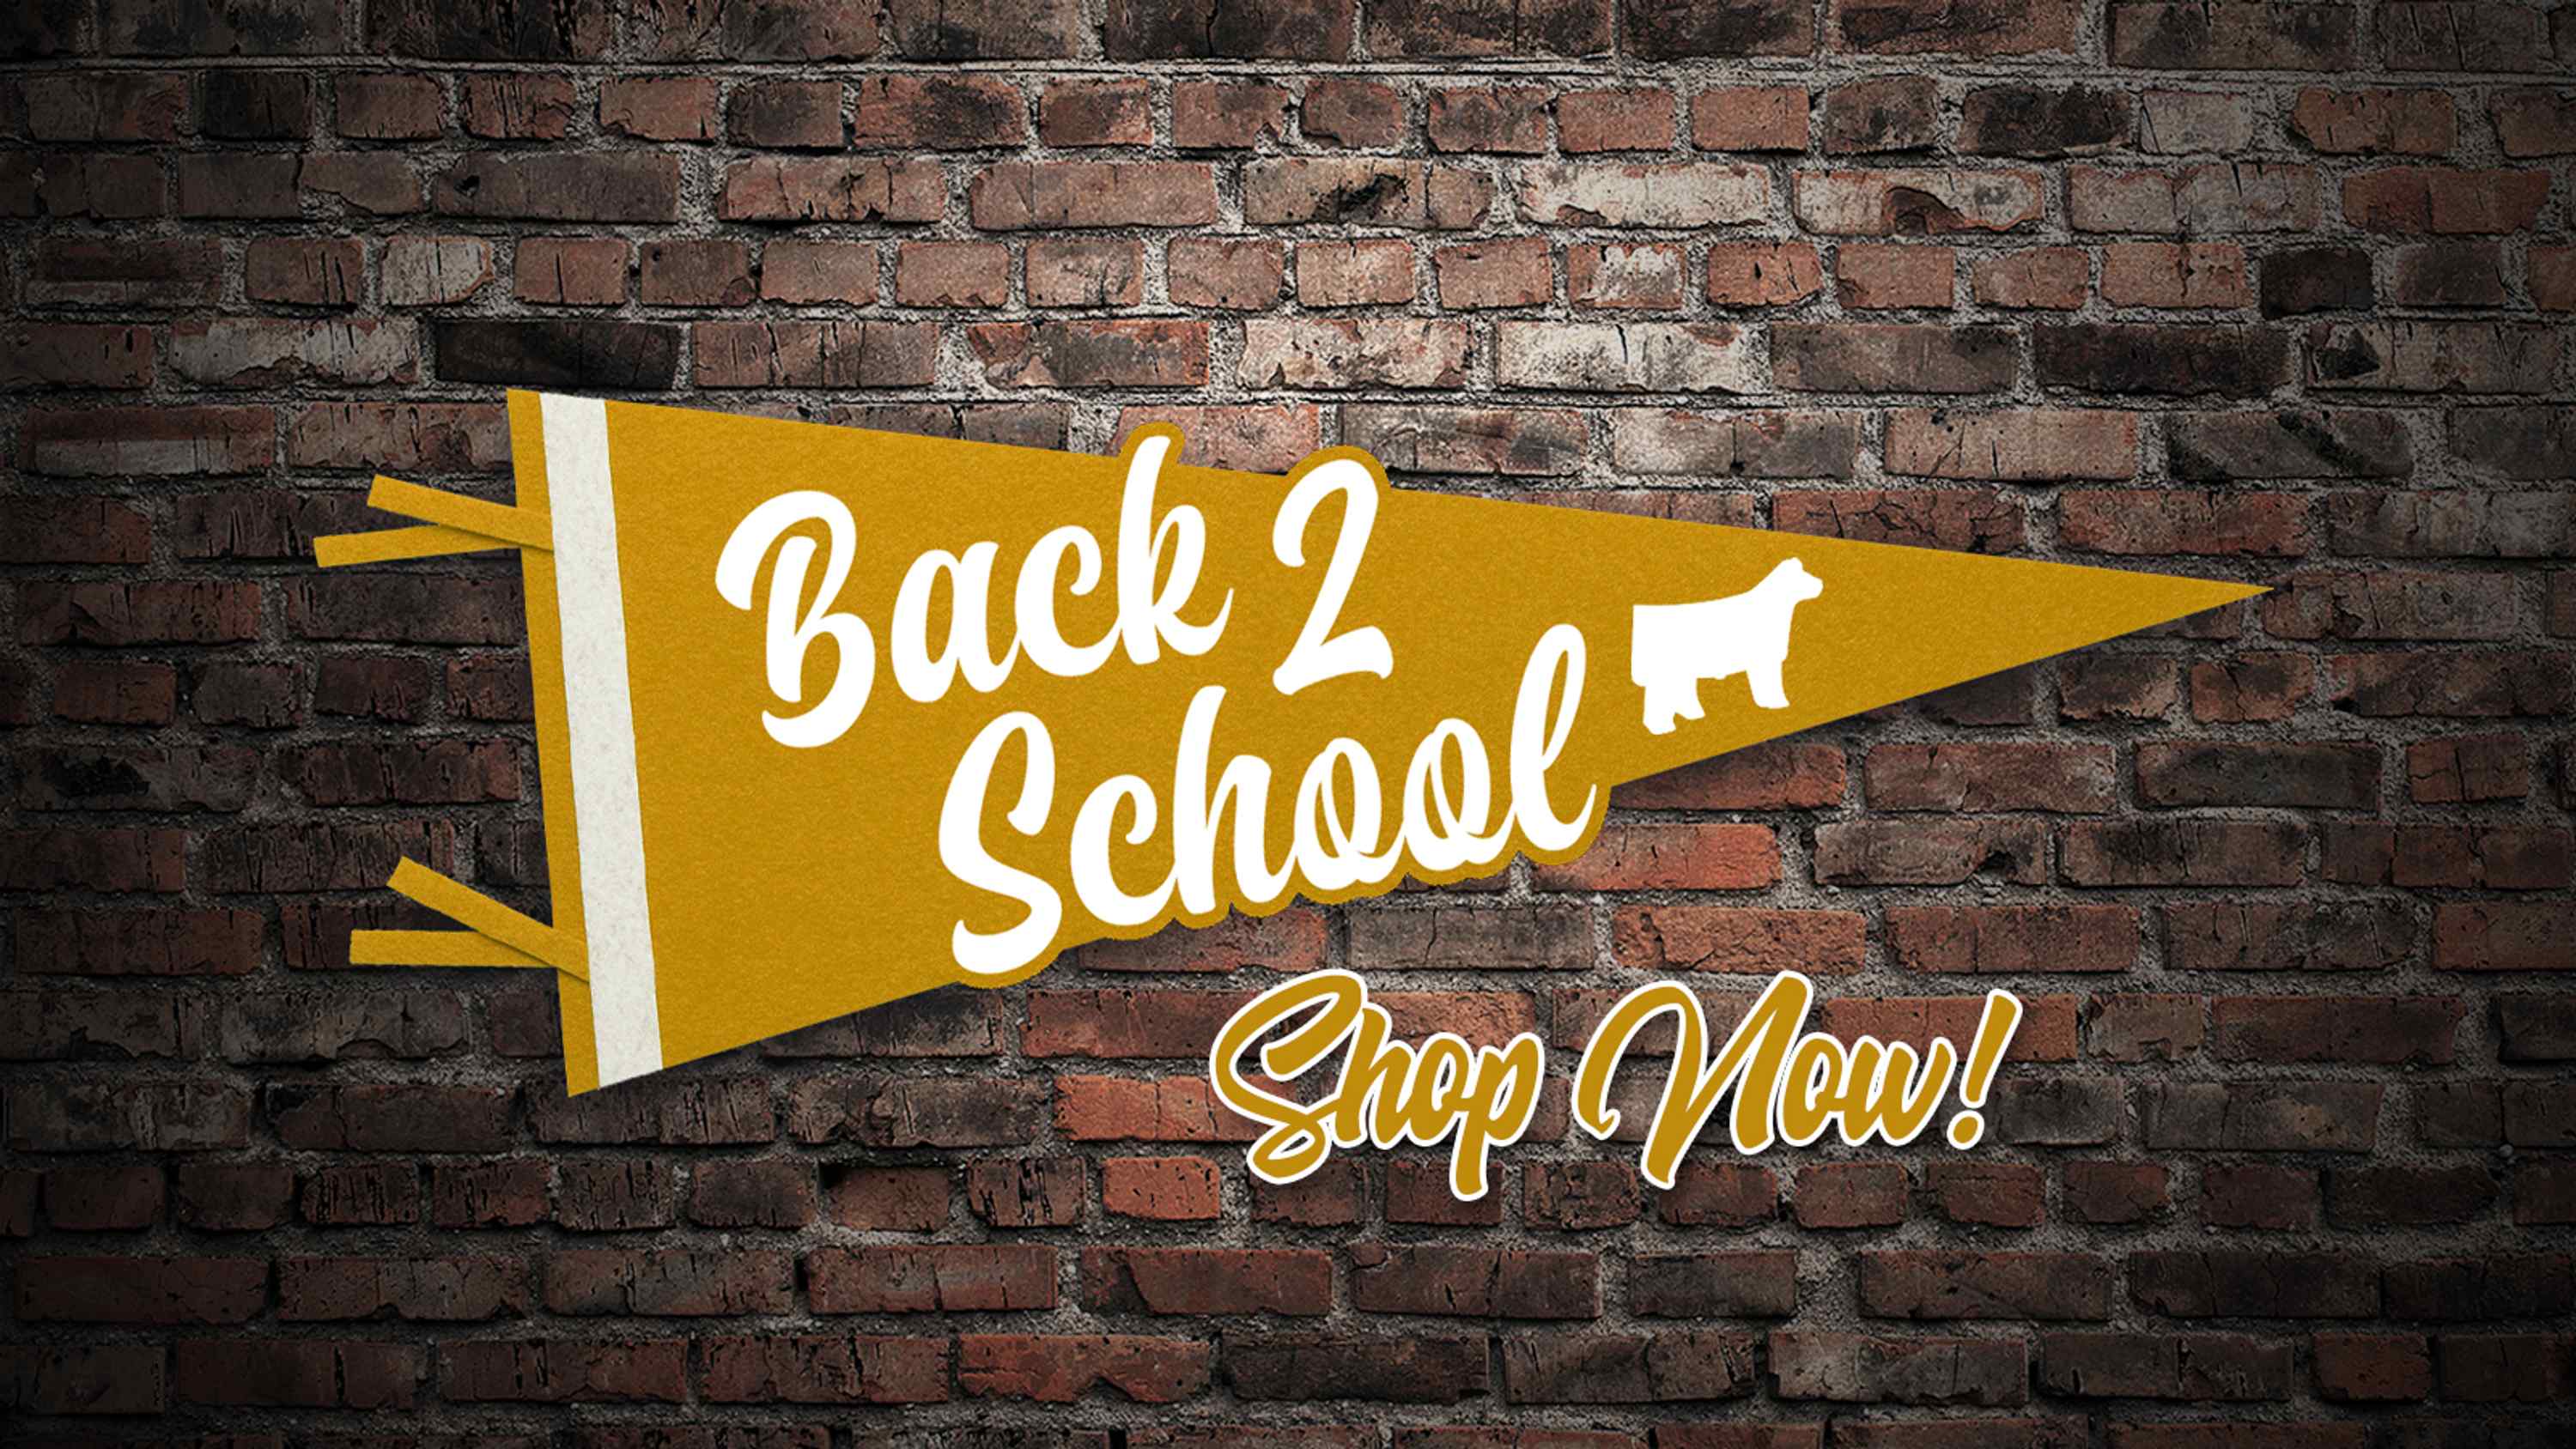 Back 2 School (Free Shipping on Orders Over $100)